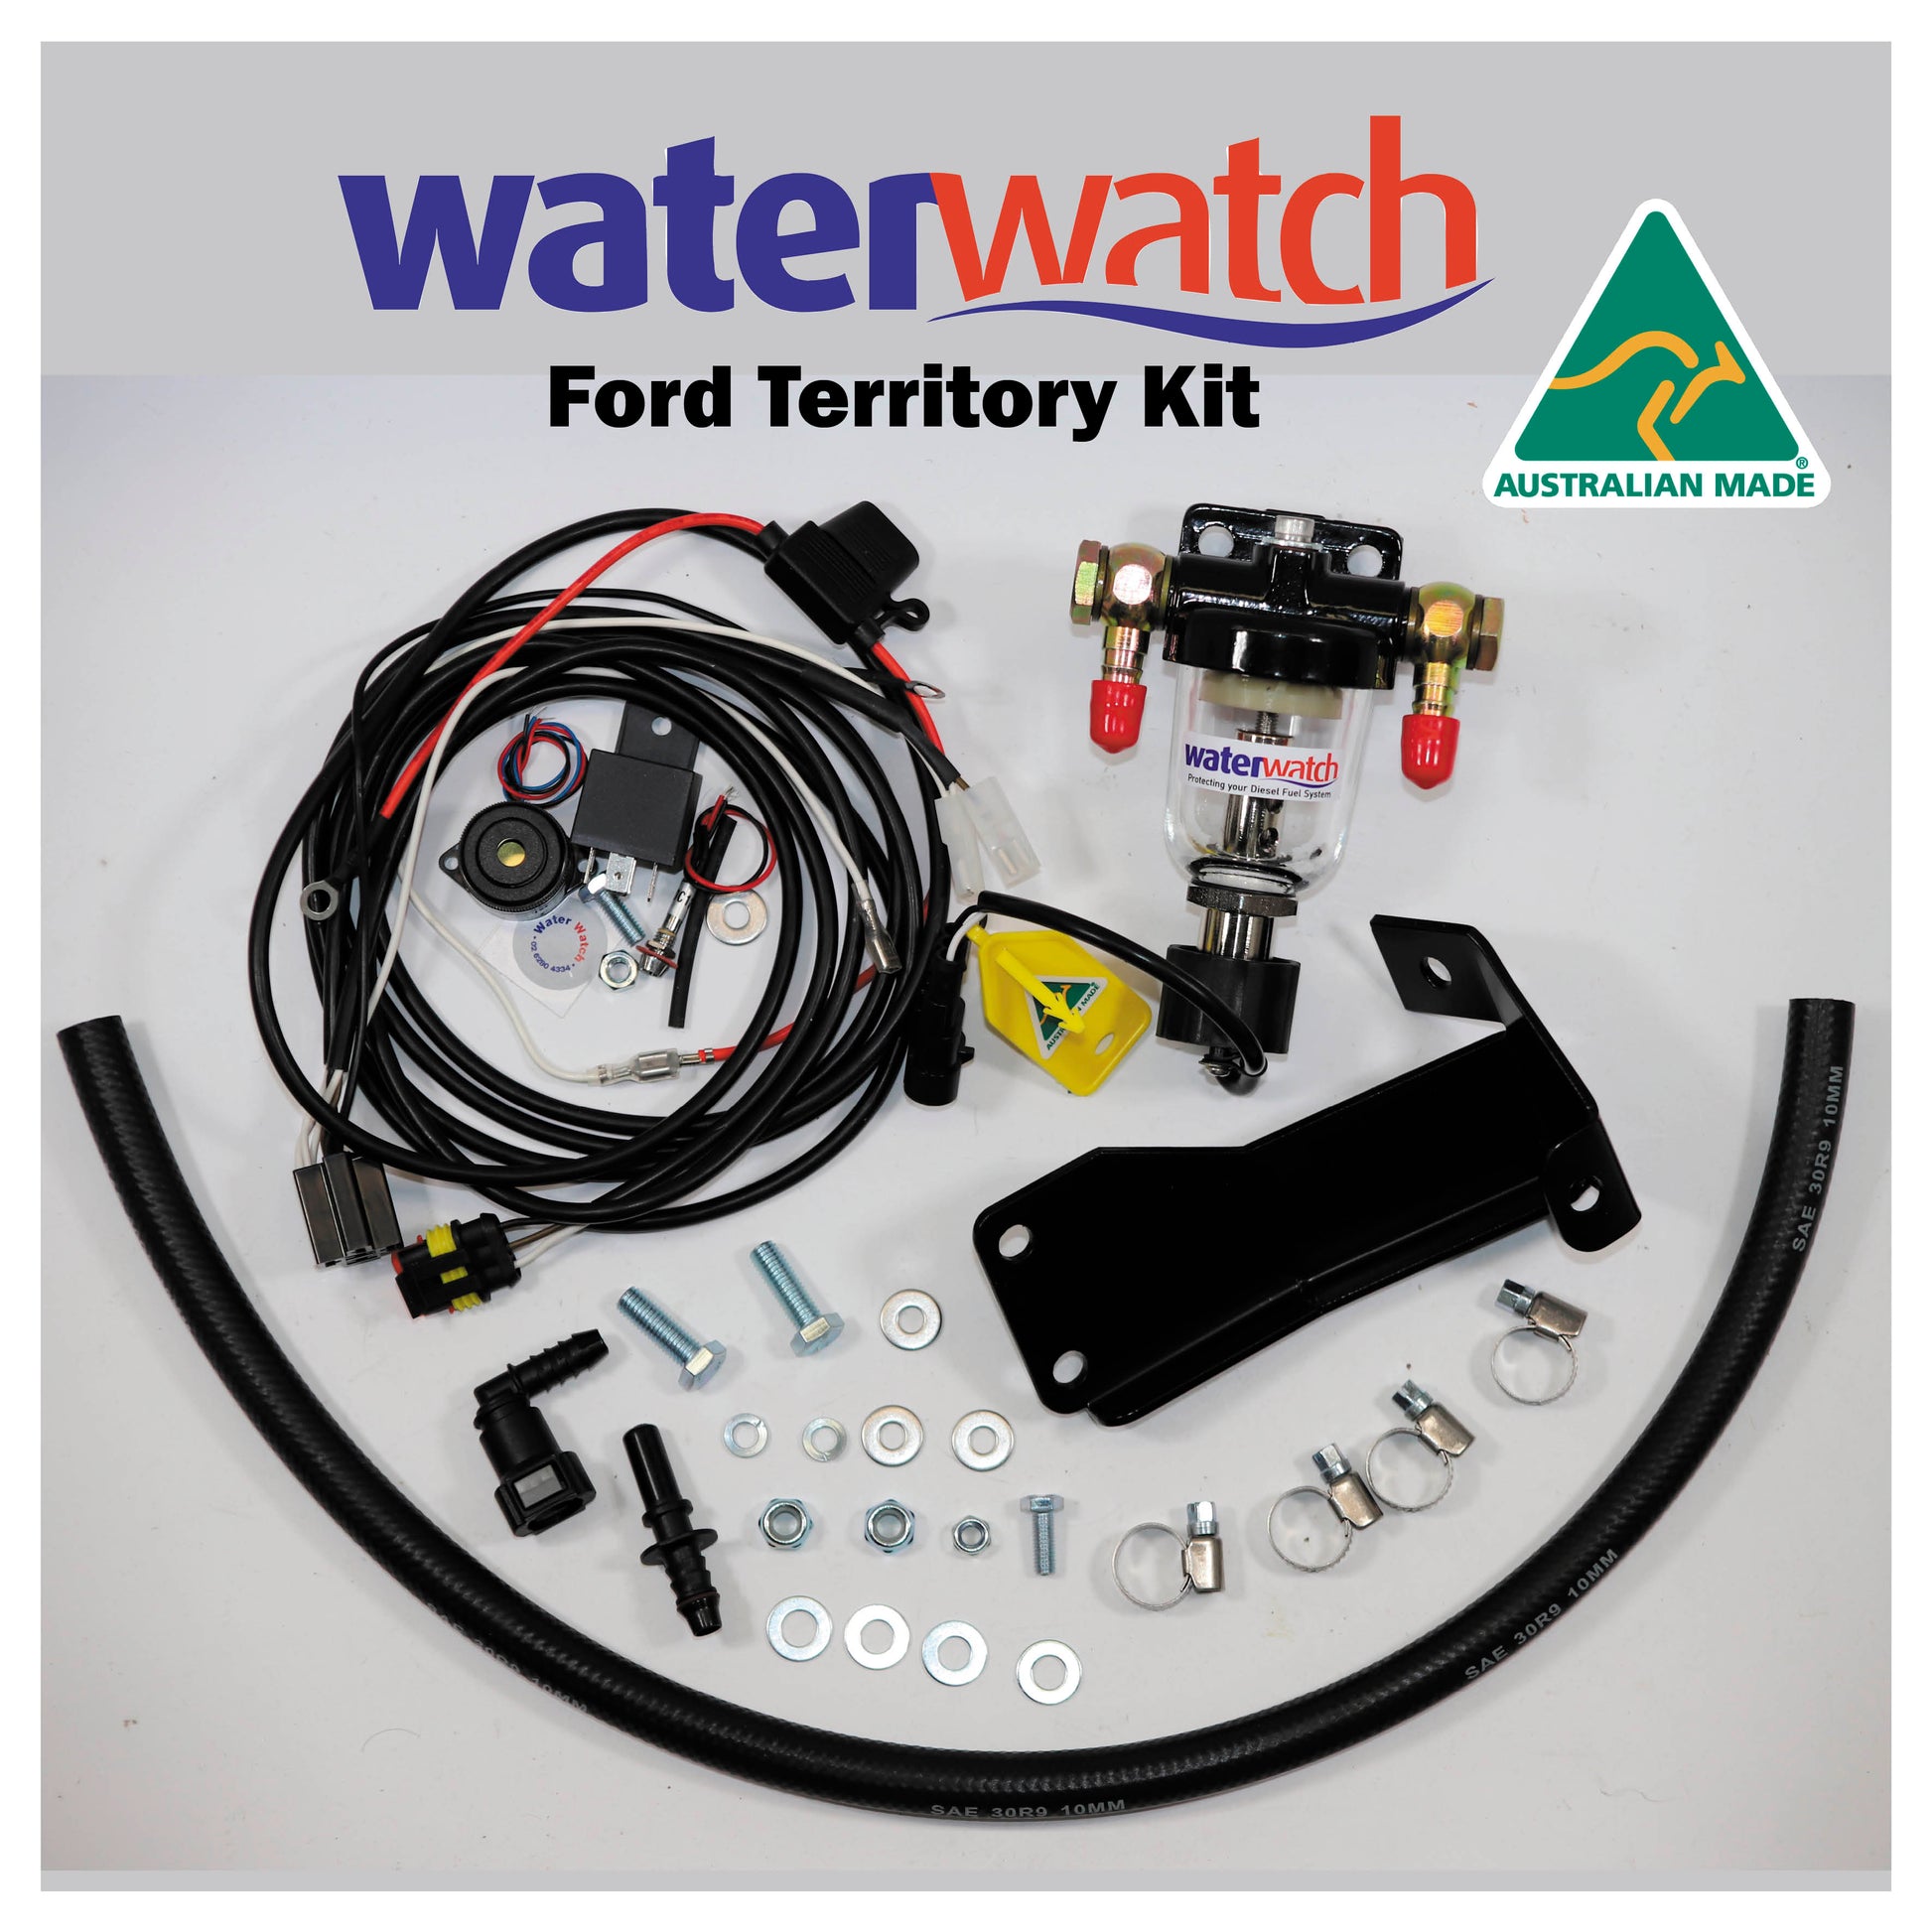 WATER WATCH for Ford Territory - Pre-filter protection against Diesel Fuel Contamination Damage - Specialist Tools Australia